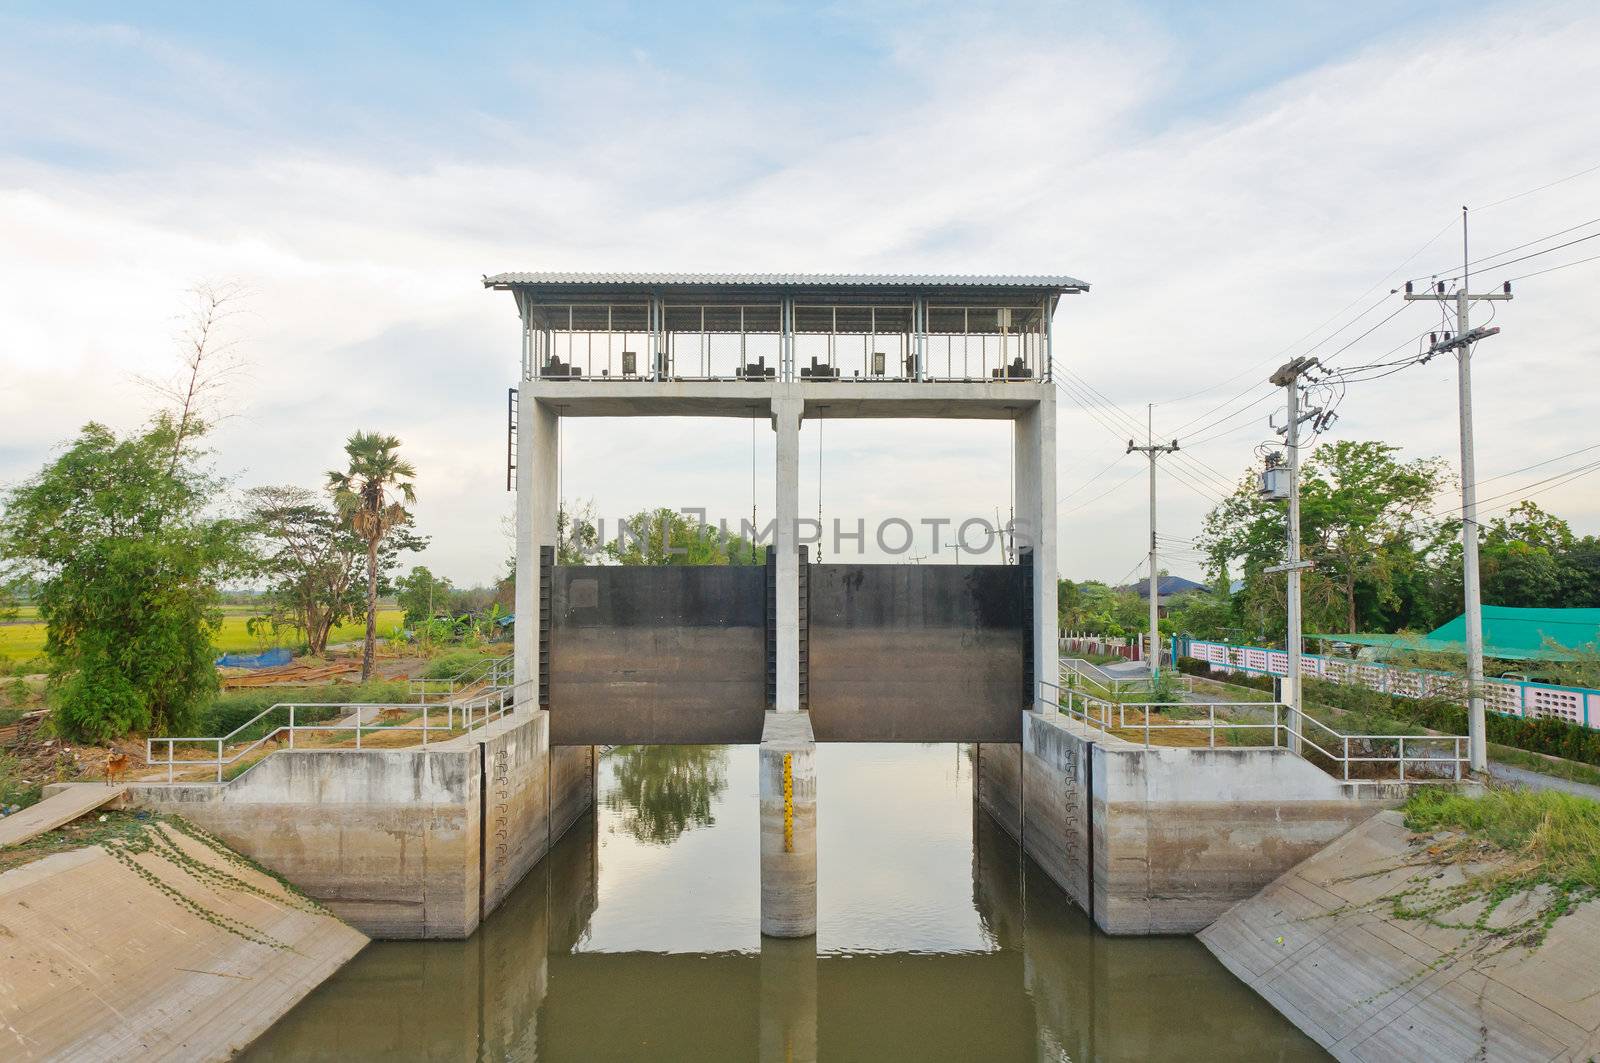 Water and dam gate in an irrigation canal, countryside of Pathumtanee, Thailand